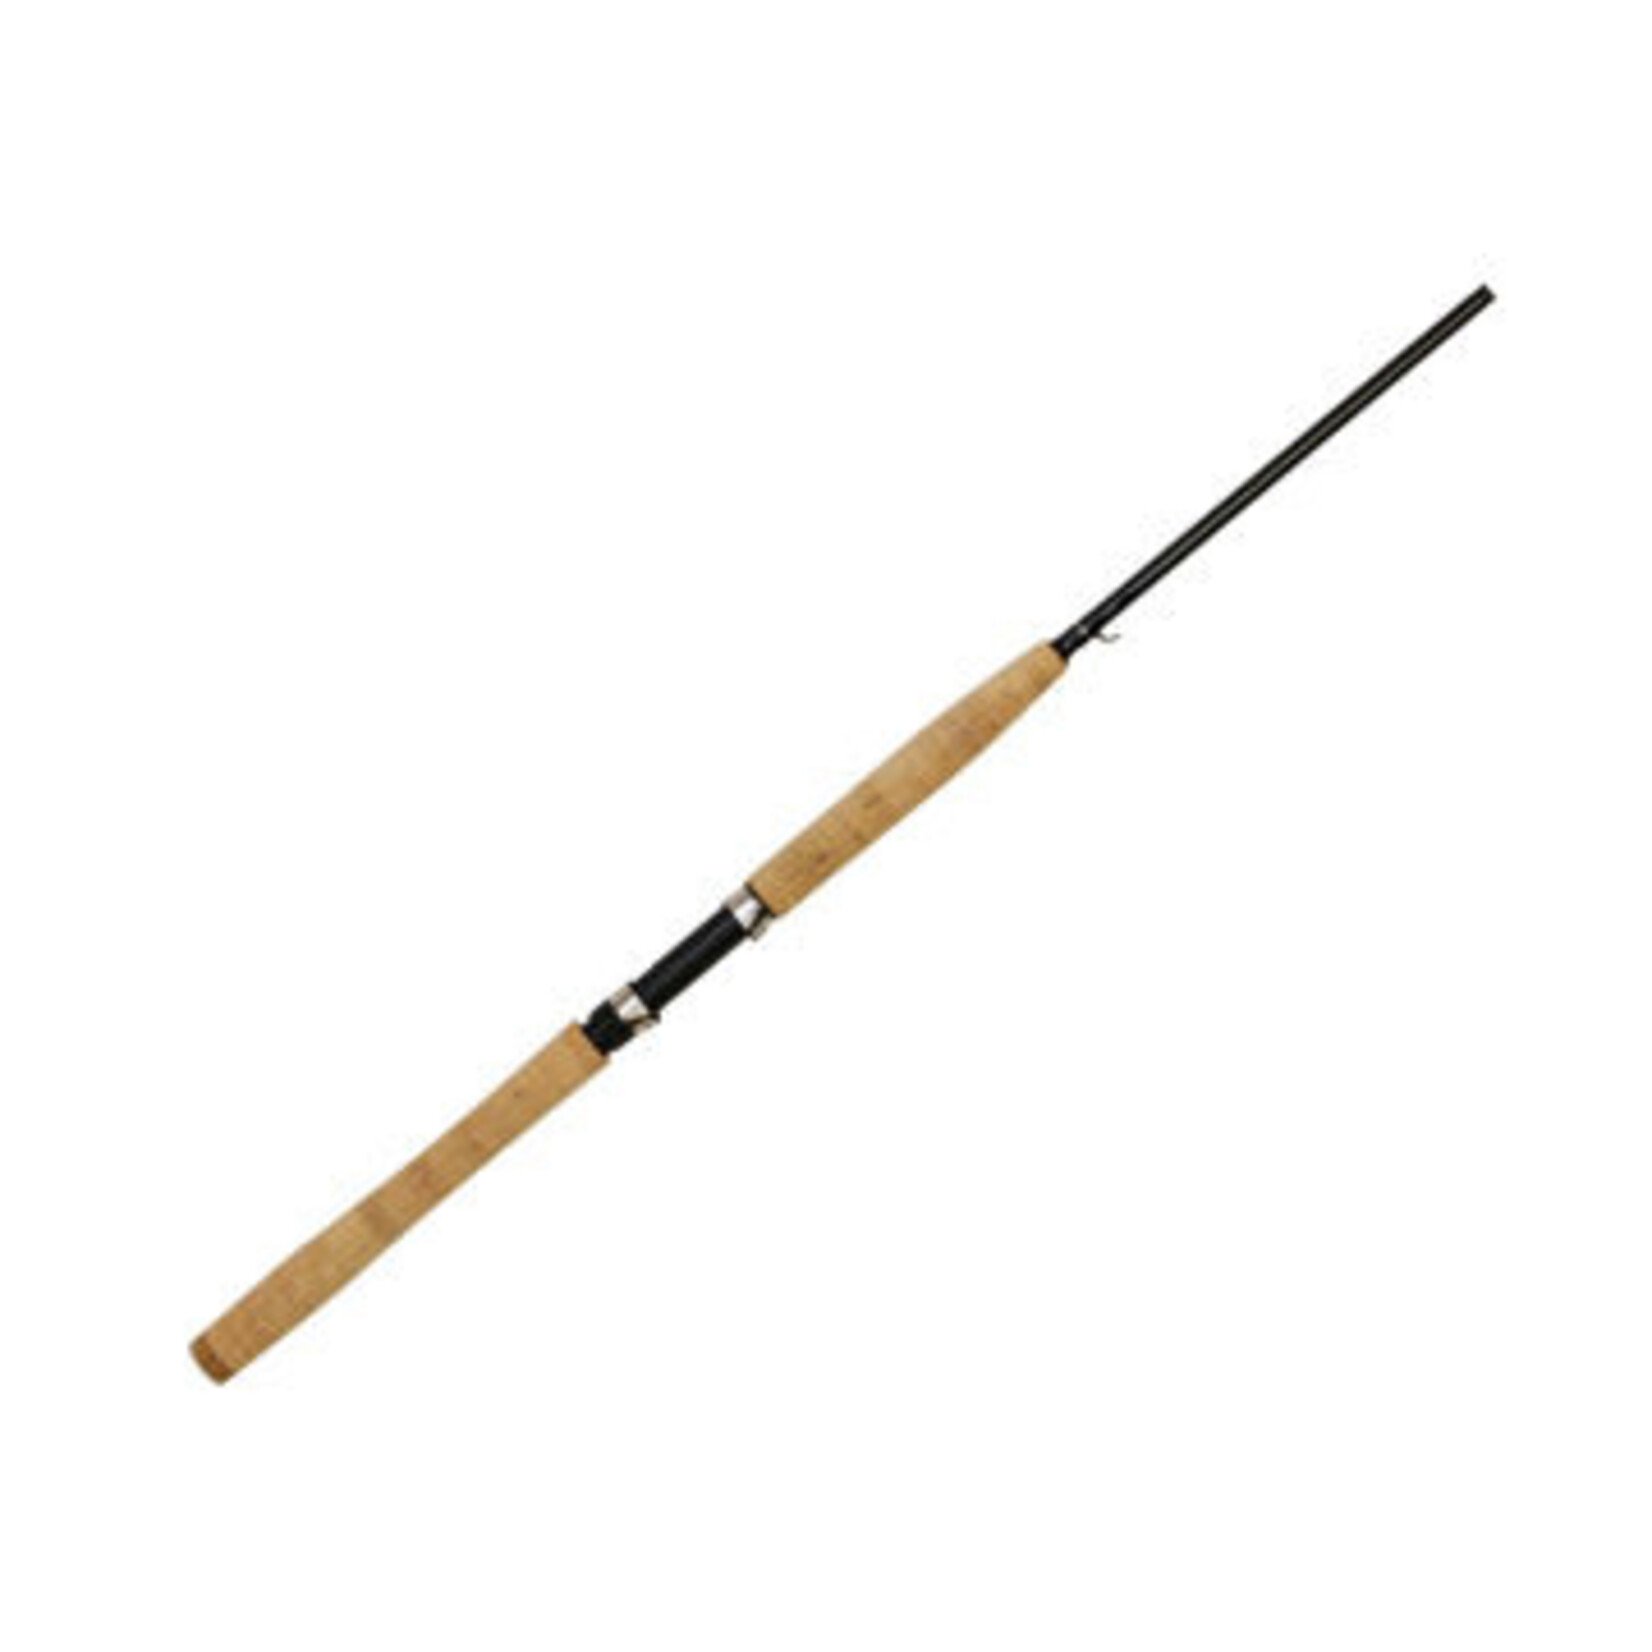 Fishing Rod Review - Uribe Riverside M2 Rods, Spiral Wrapped Guide System